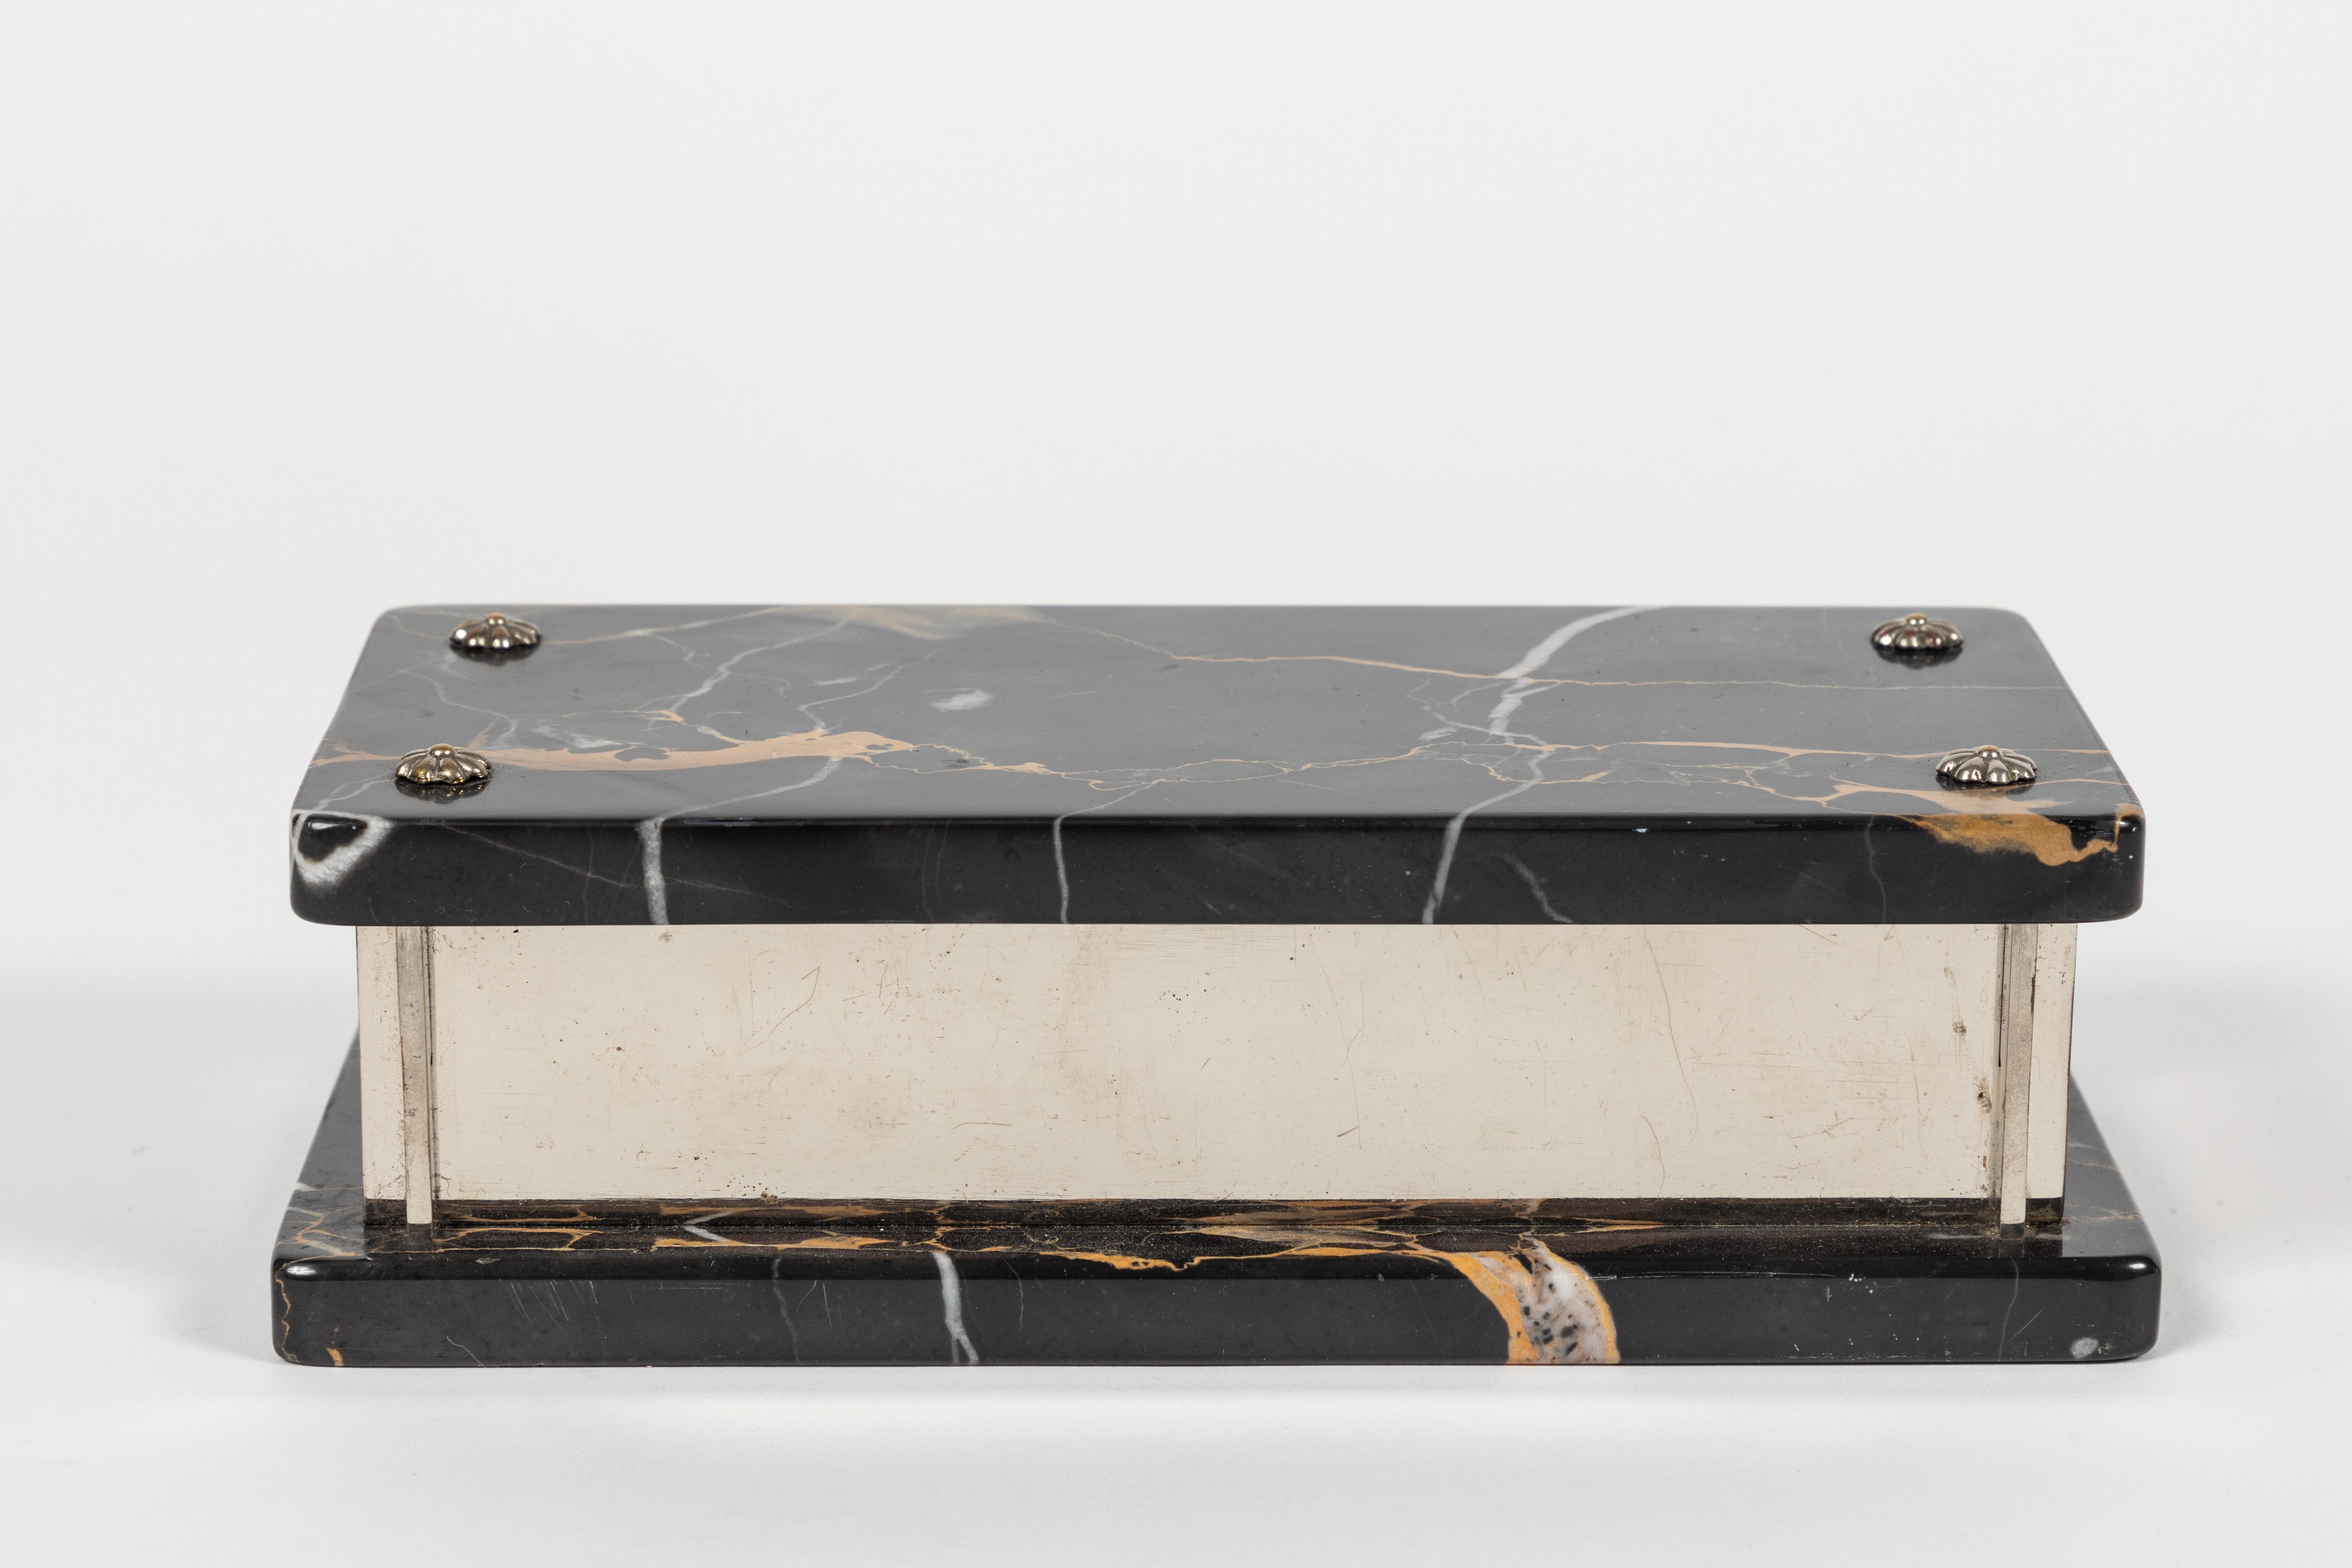 Super chic veined marble and nickel-plated box. The bottom and top are 1/2